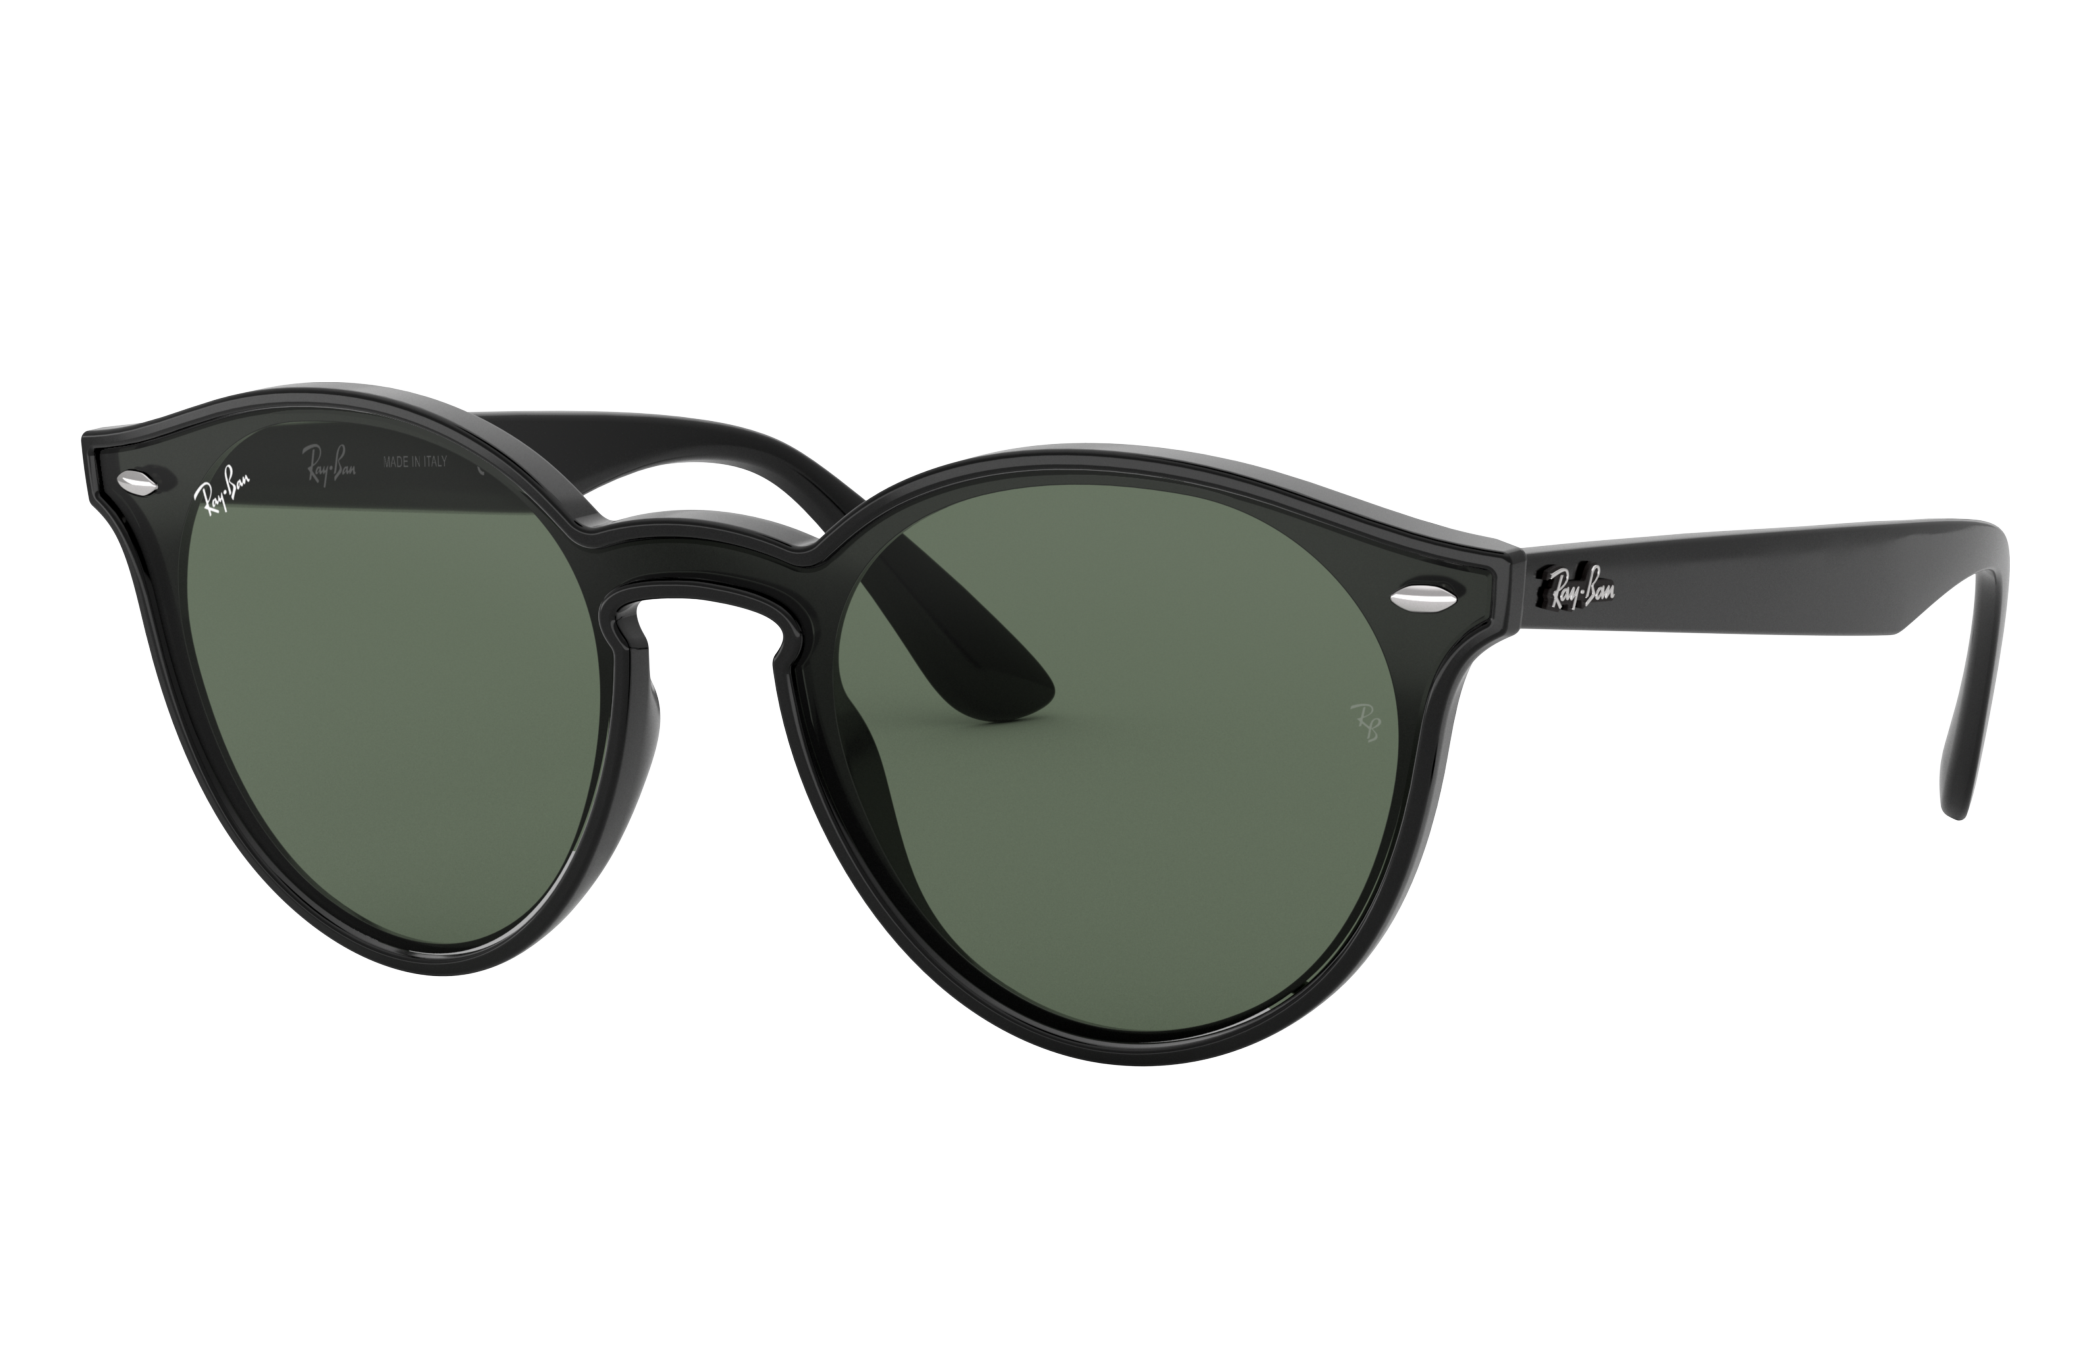 Blaze Rb4380n Sunglasses in Black and Green Ray-Ban®